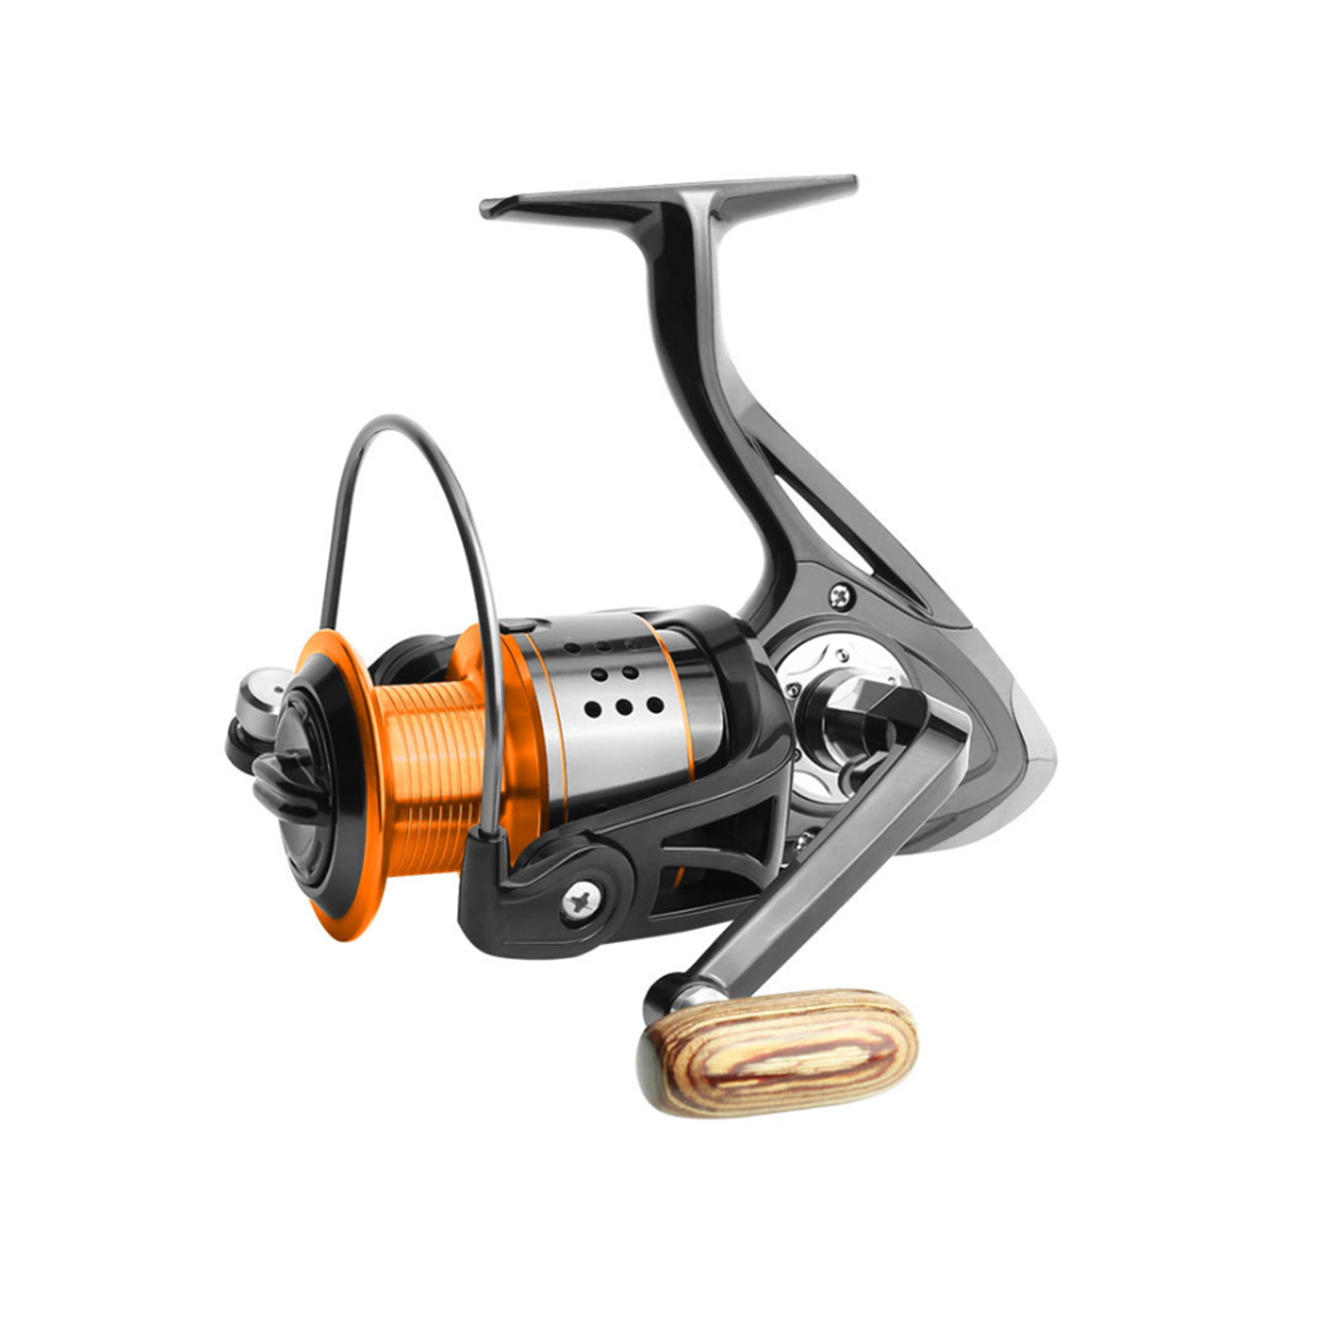 All Metal Line Cup Fishing Boats Sea Reels Spinning Reel Spinfisher Fa4000